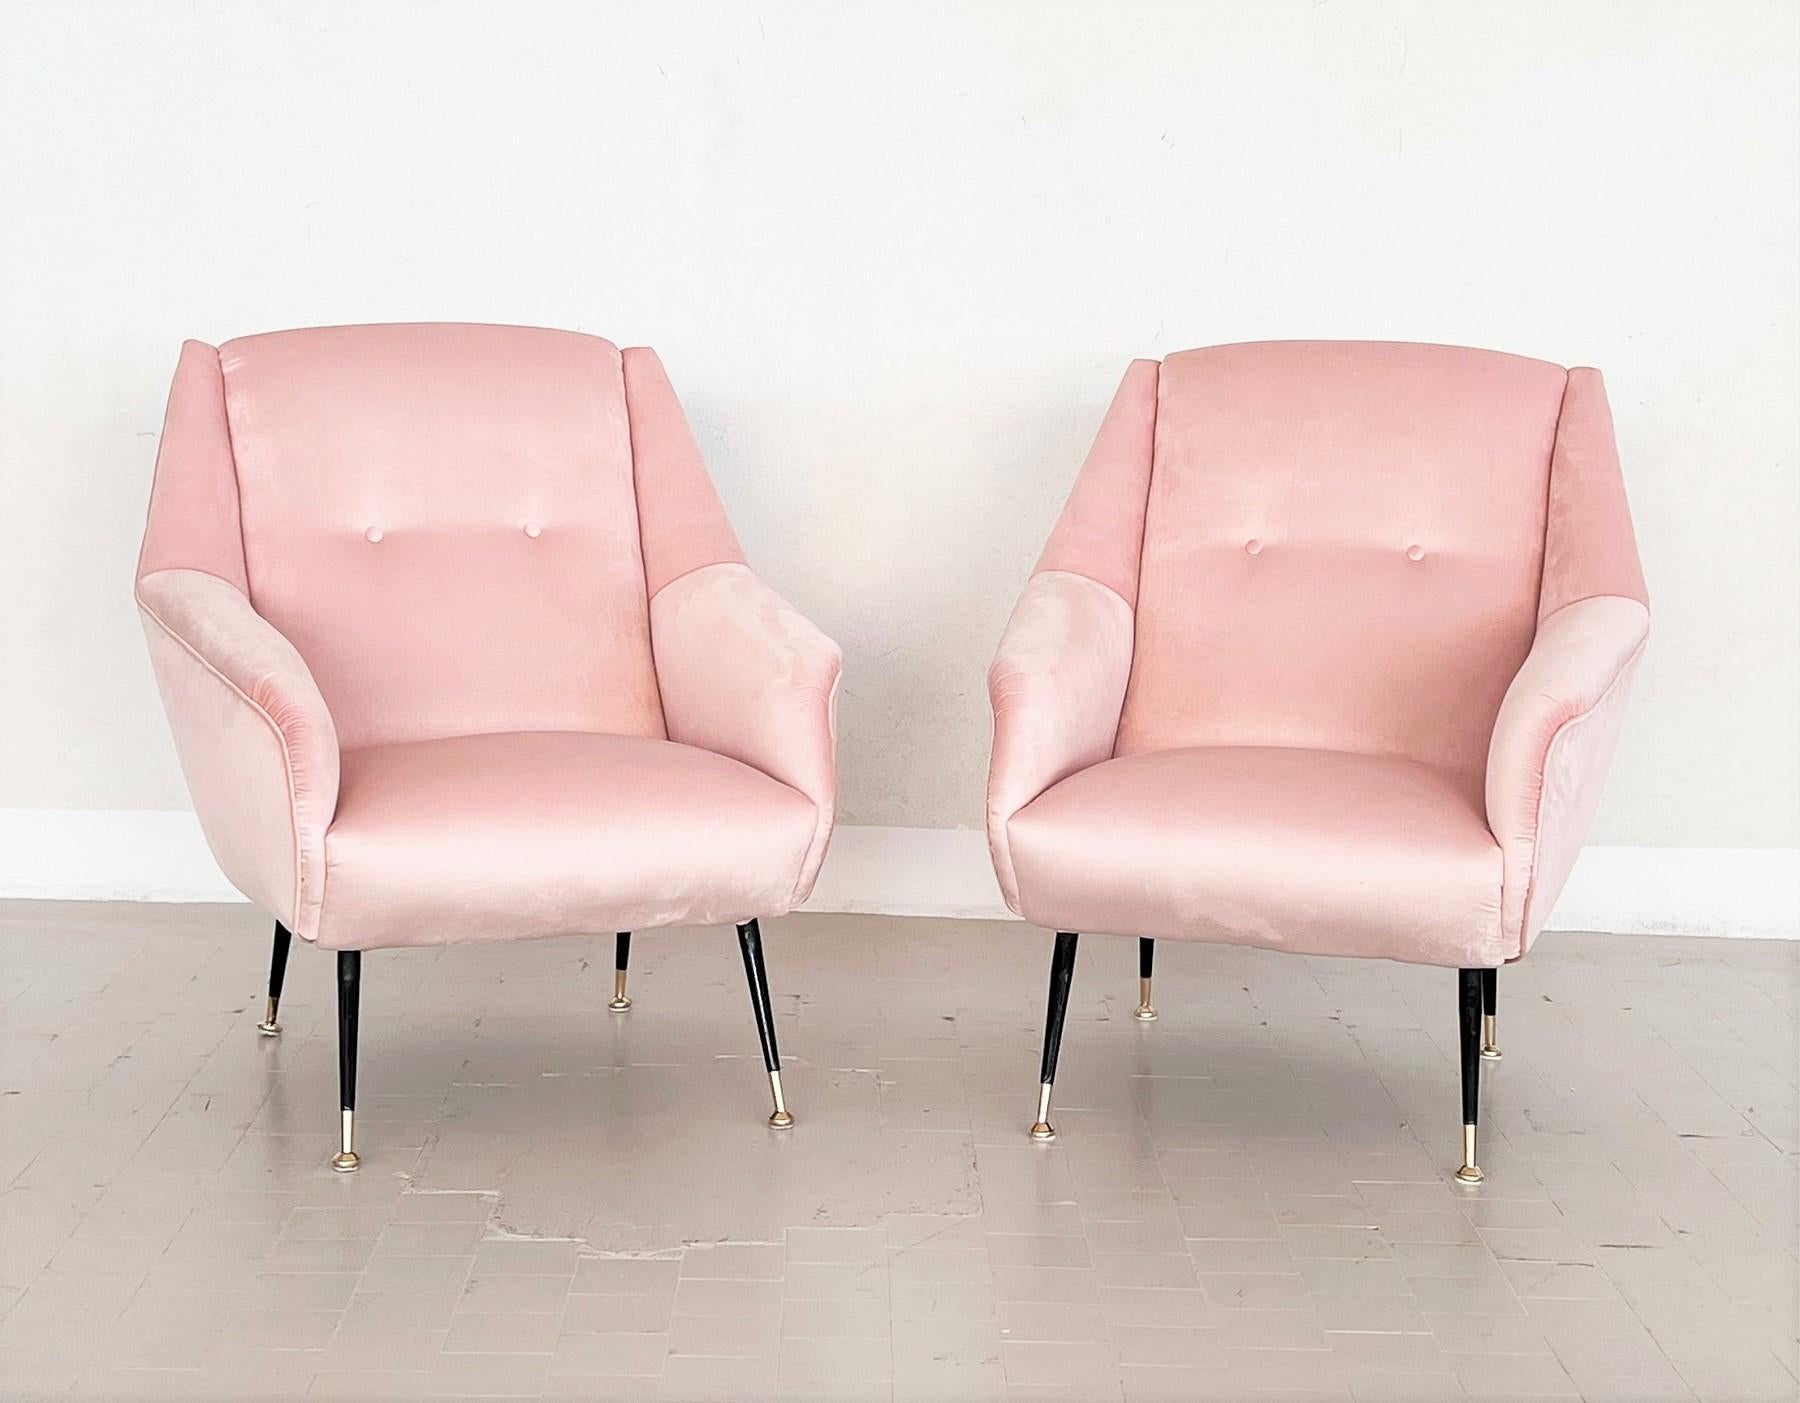 Italian Midcentury Armchairs in Soft Pink Velvet and Brass Tips, 1950s For Sale 4